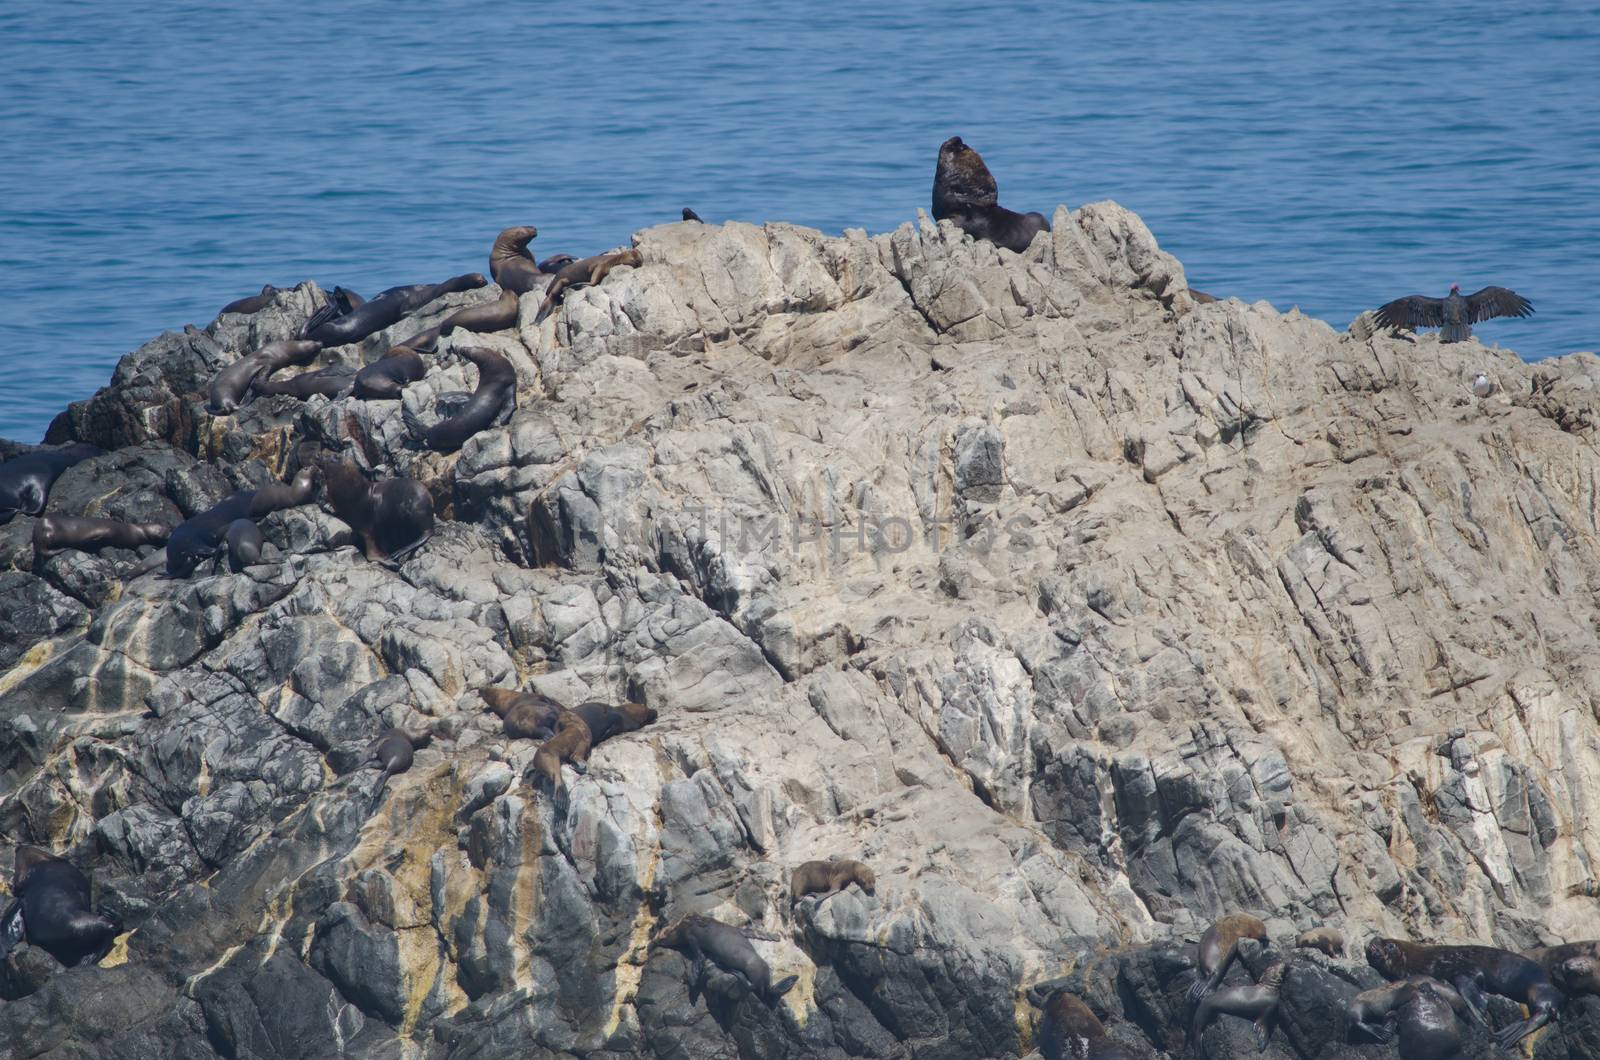 South American sea lions and turkey vulture to the right. by VictorSuarez